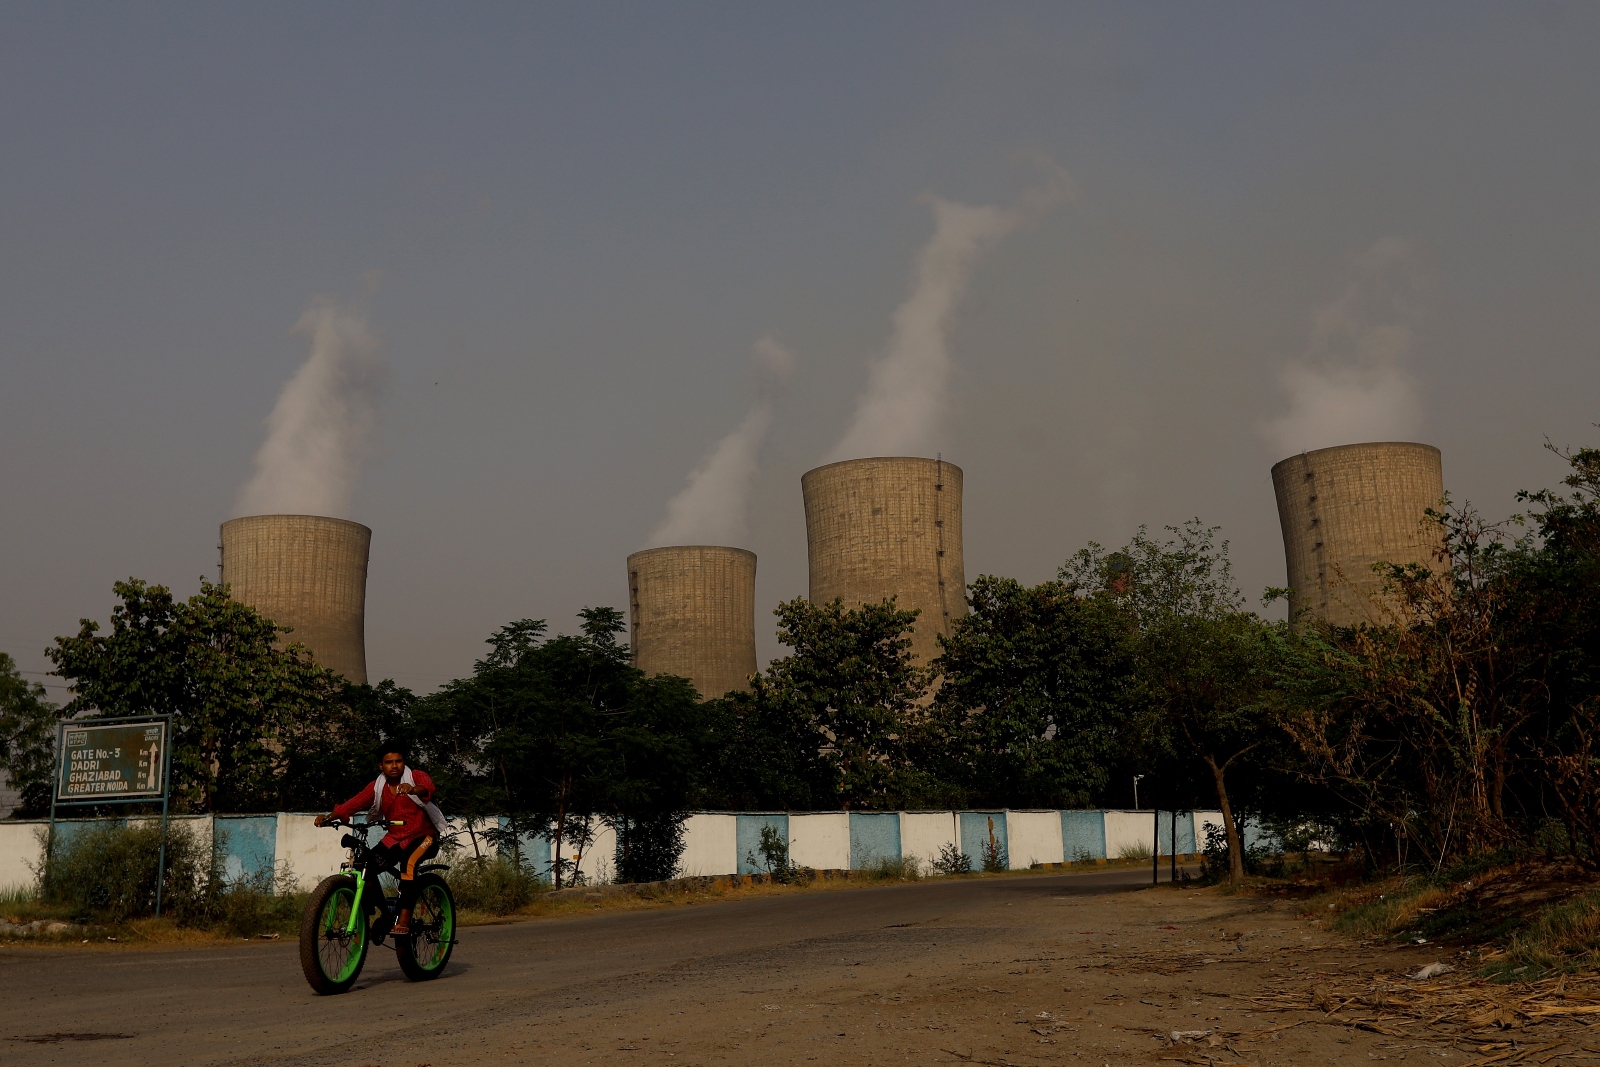 An Indian man rides a bike in front of the National Thermal Power Corporation coal-fired power plant in the Gautam Budh Nagar district of Ghaziabad, India.